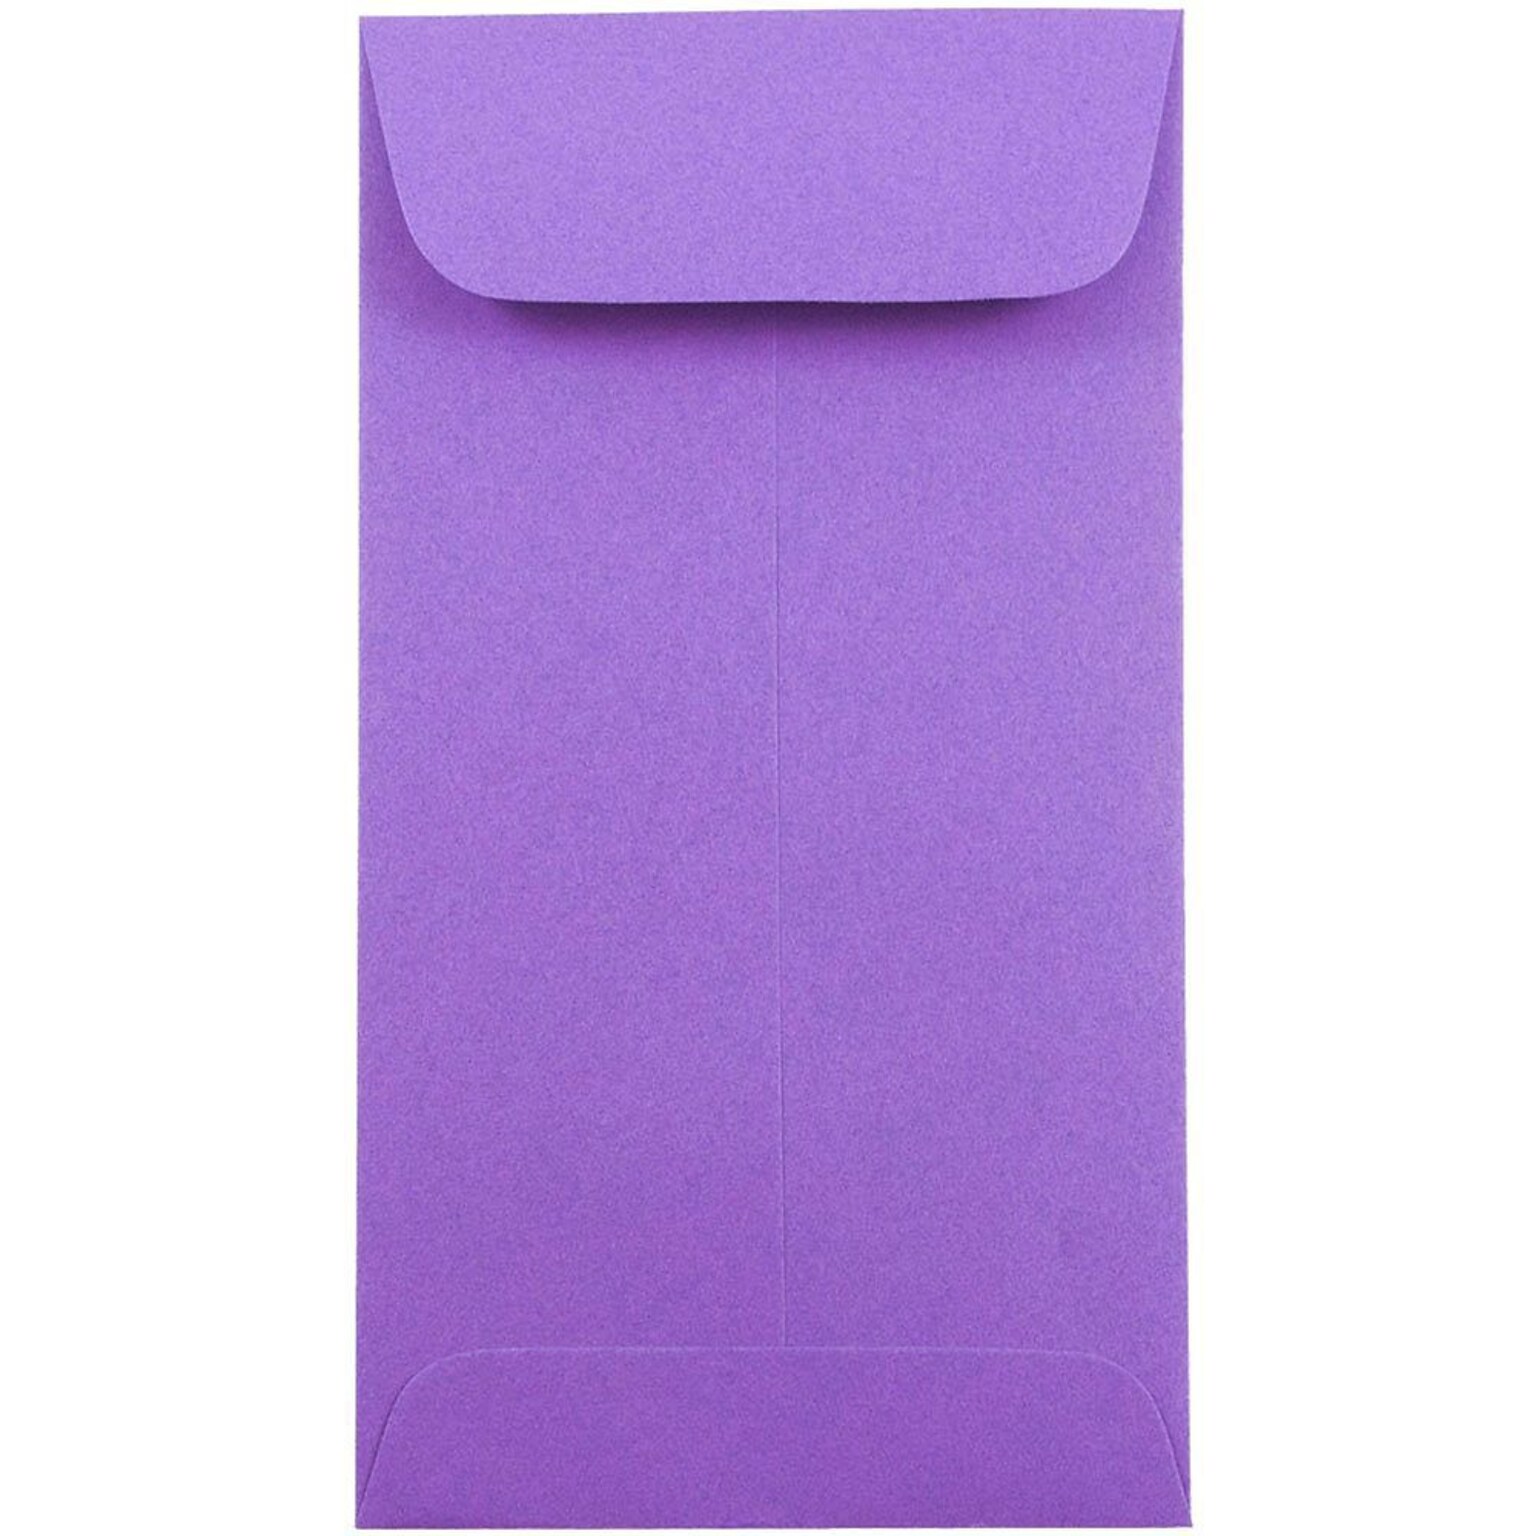 JAM Paper #7 Coin Envelopes, 3 1/2 x 6 1/2, Violet Purple Recycled, 50/Pack (1526758I)